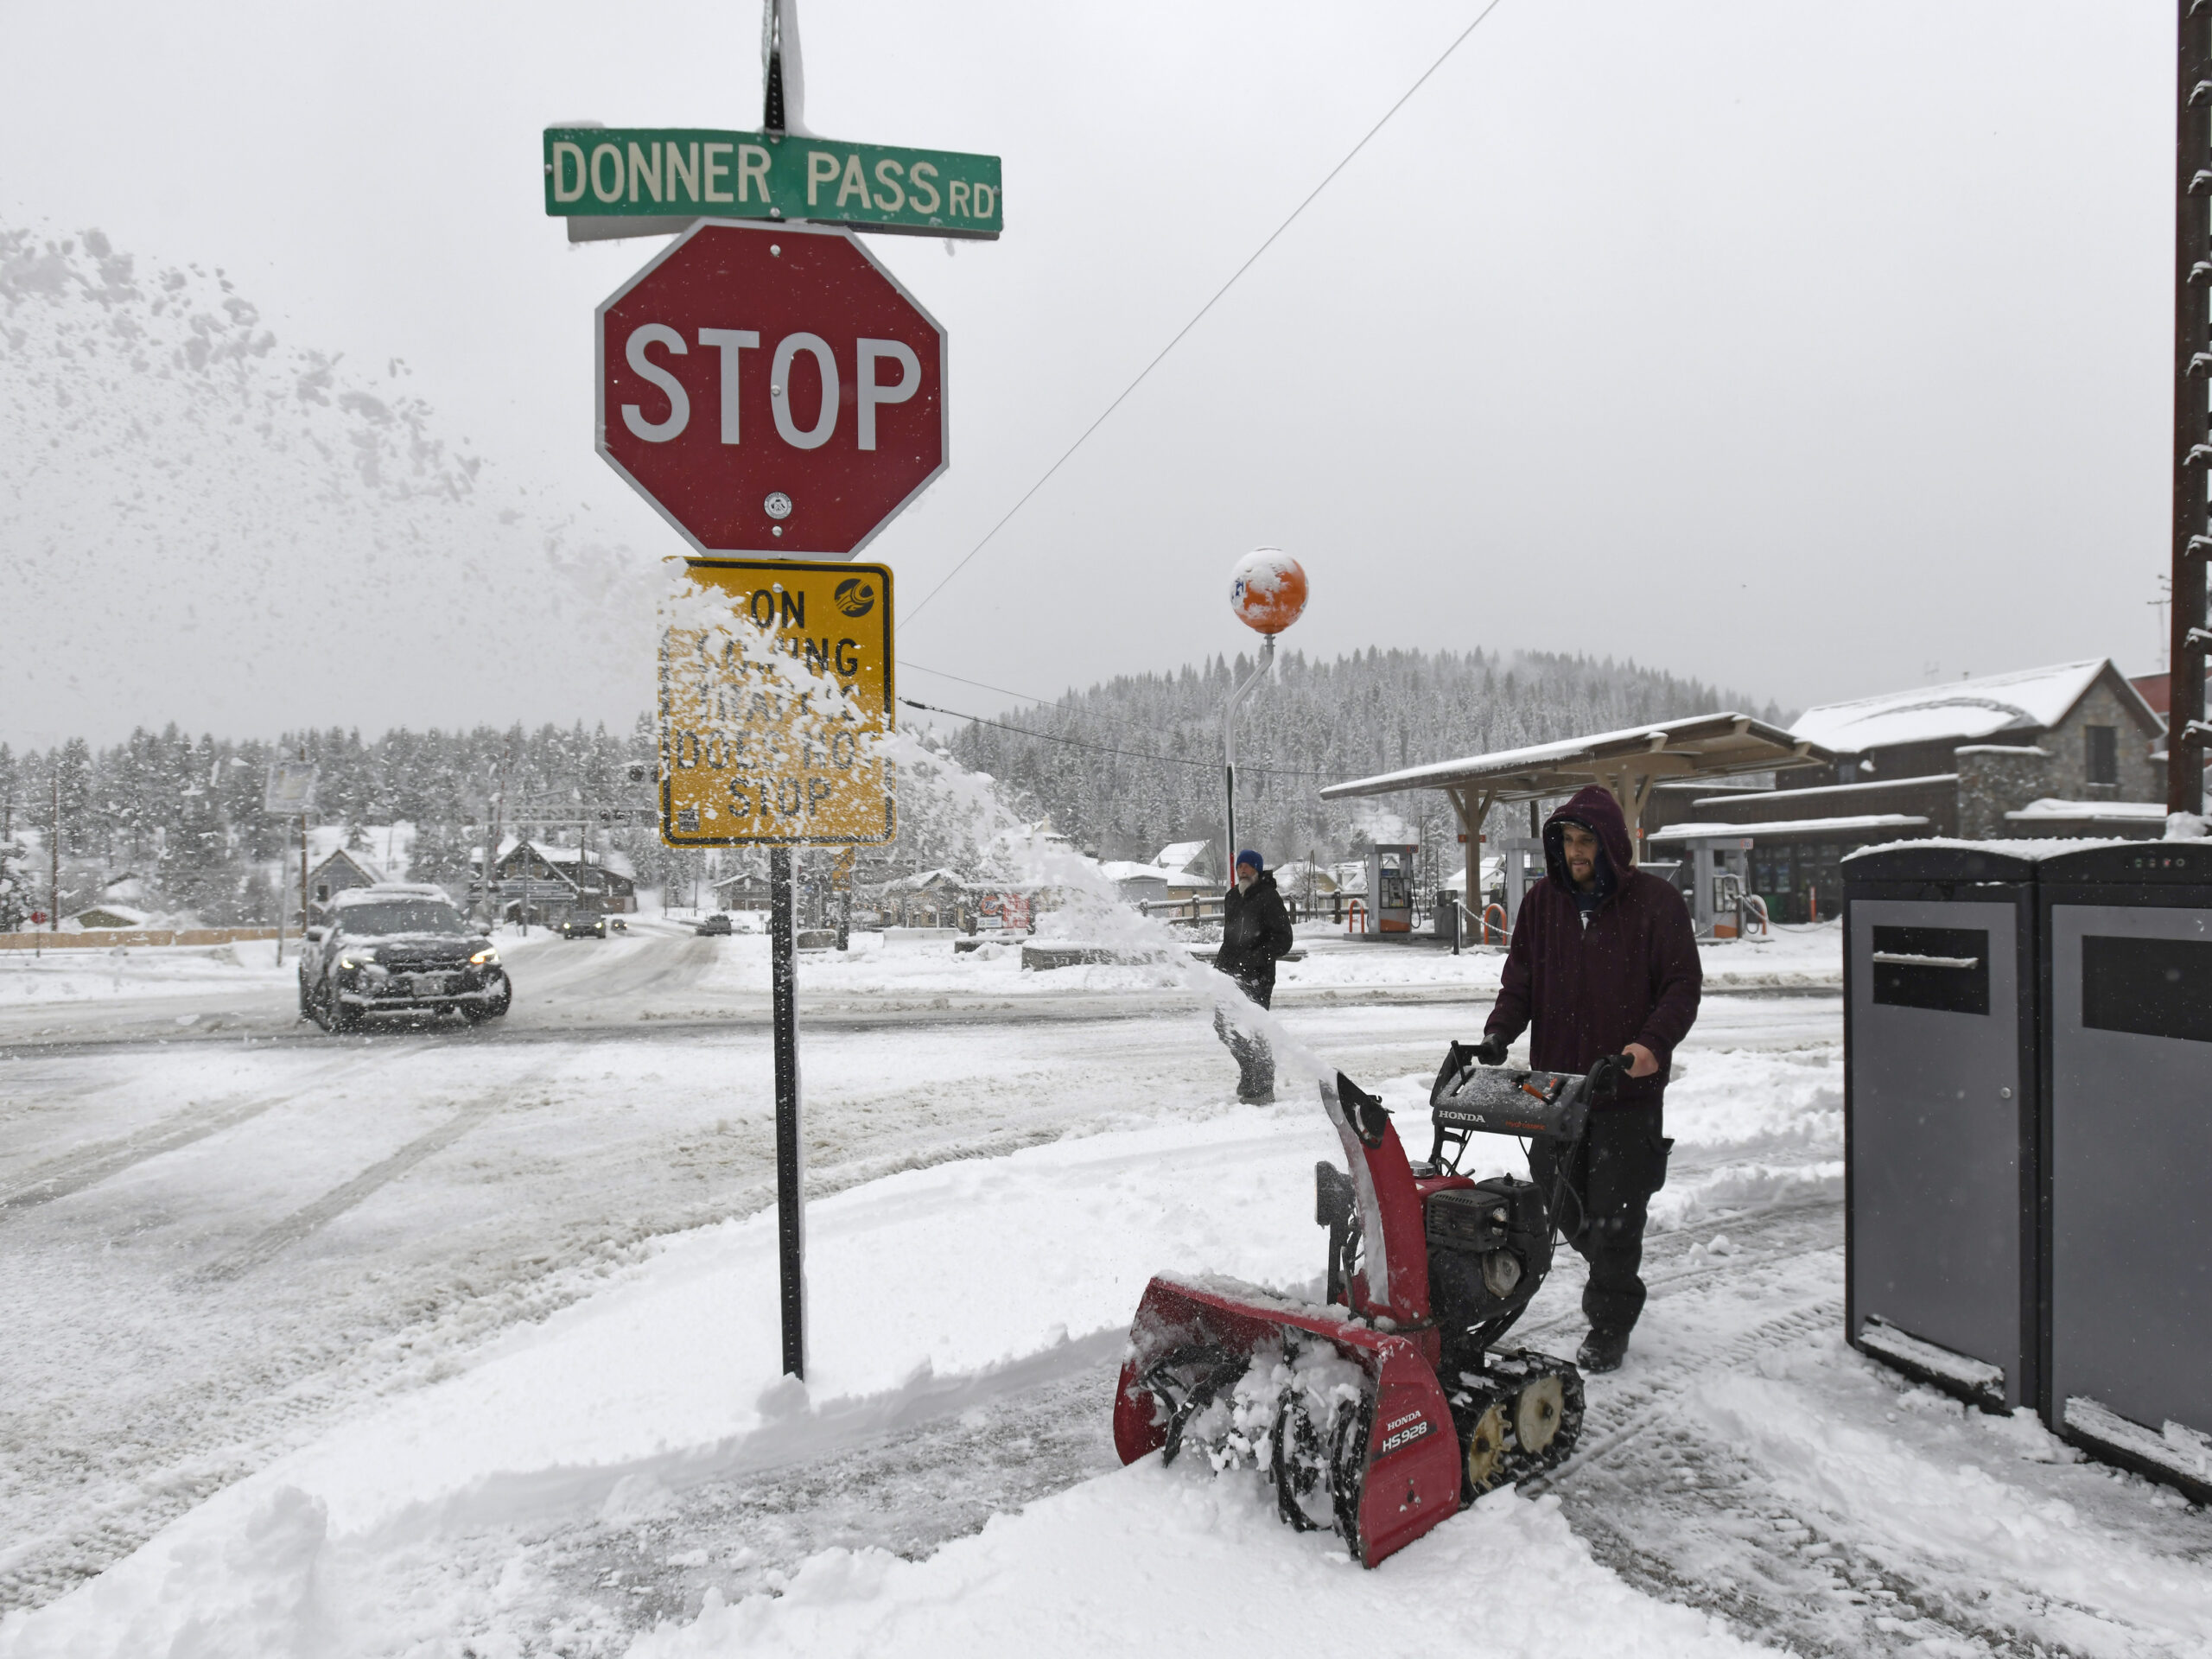 Yosemite visitors are told to leave as storm expected to drop up to 10 feet of snow